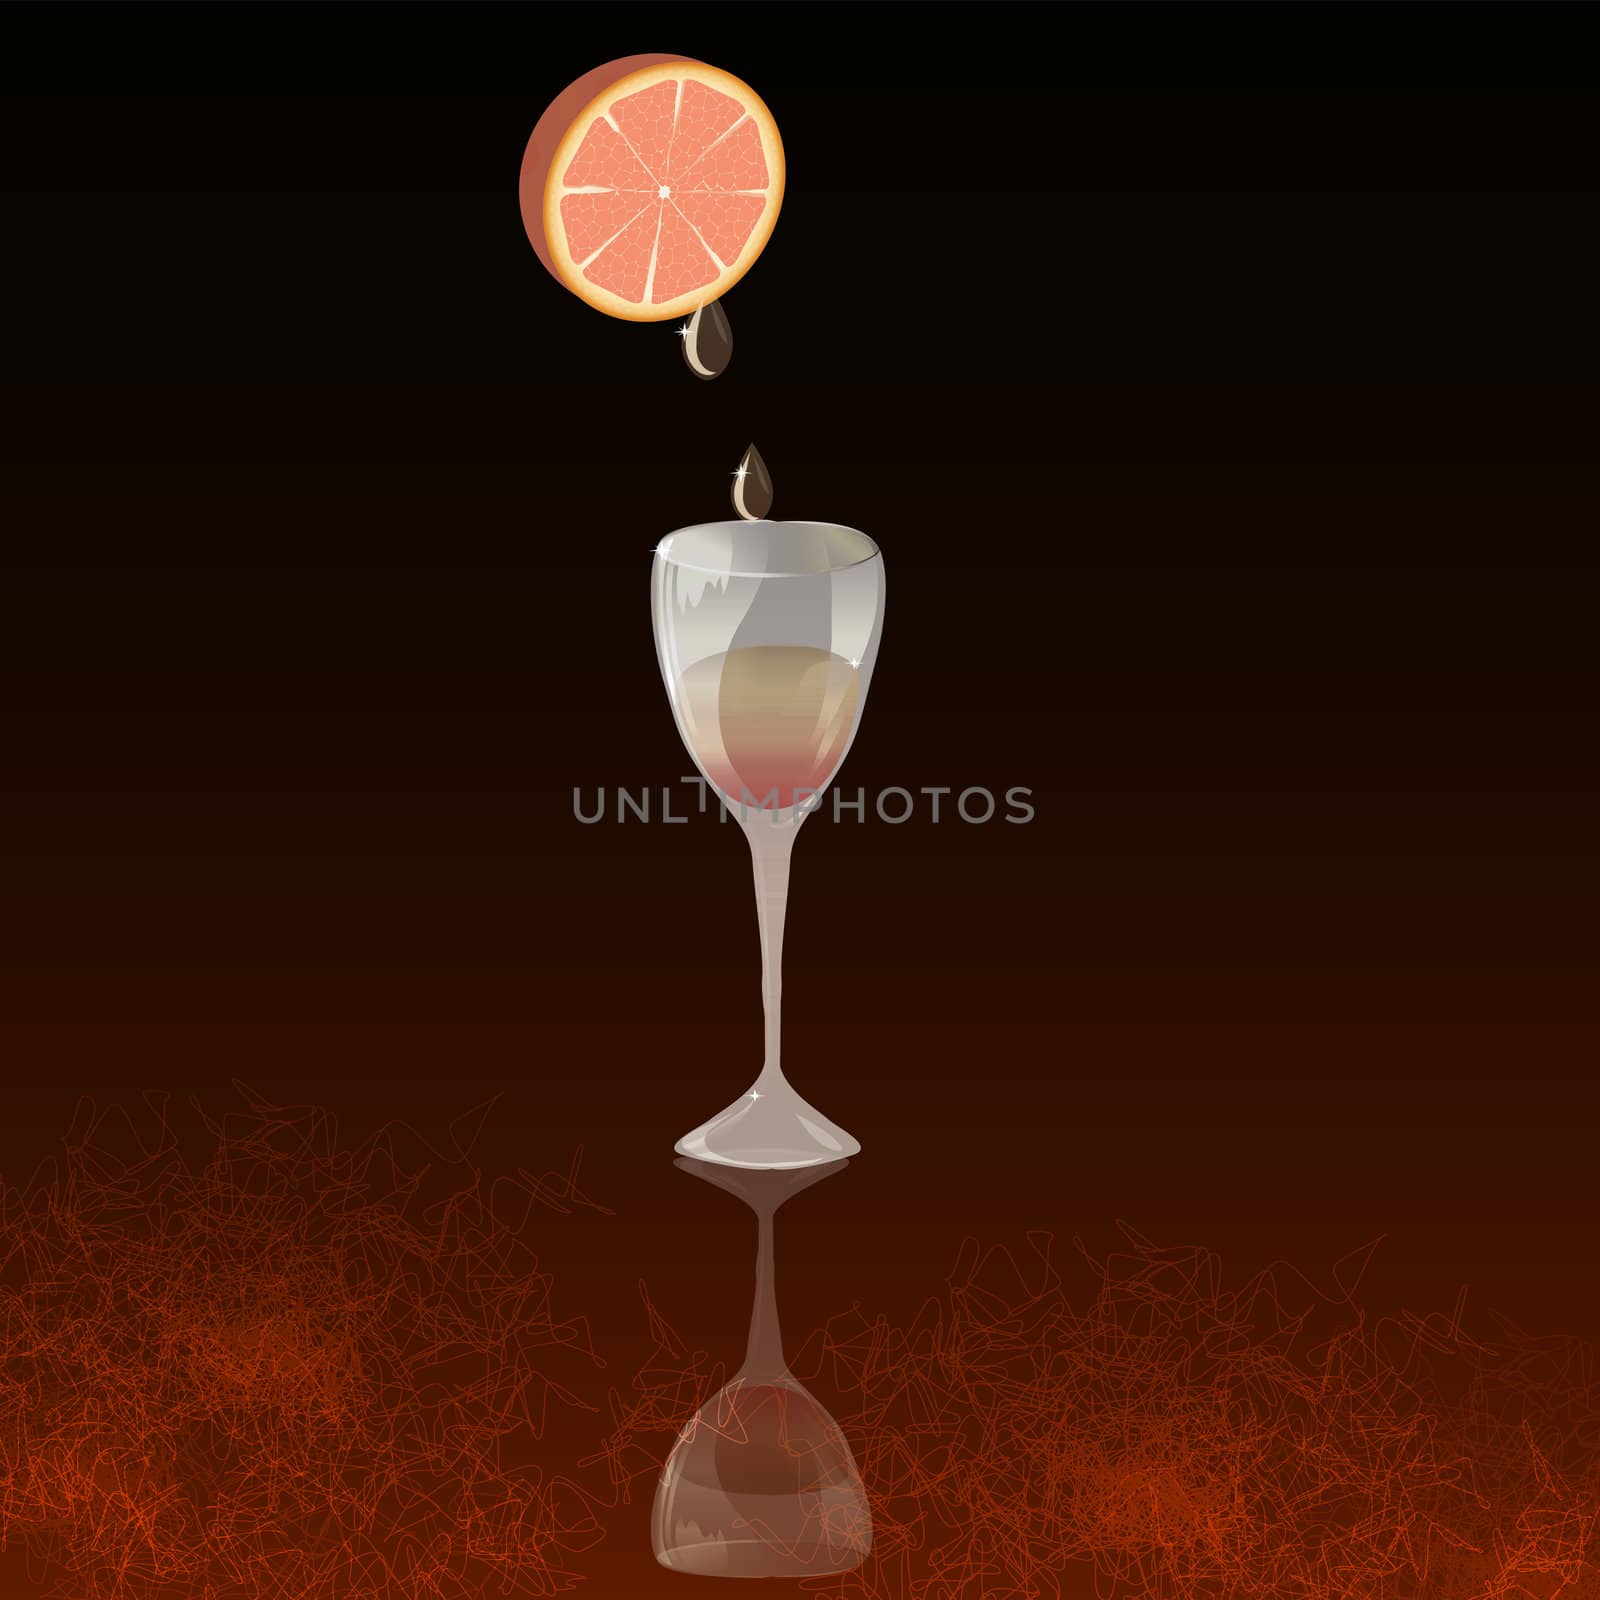 drawing a glass of grapefruit juice filling a glass